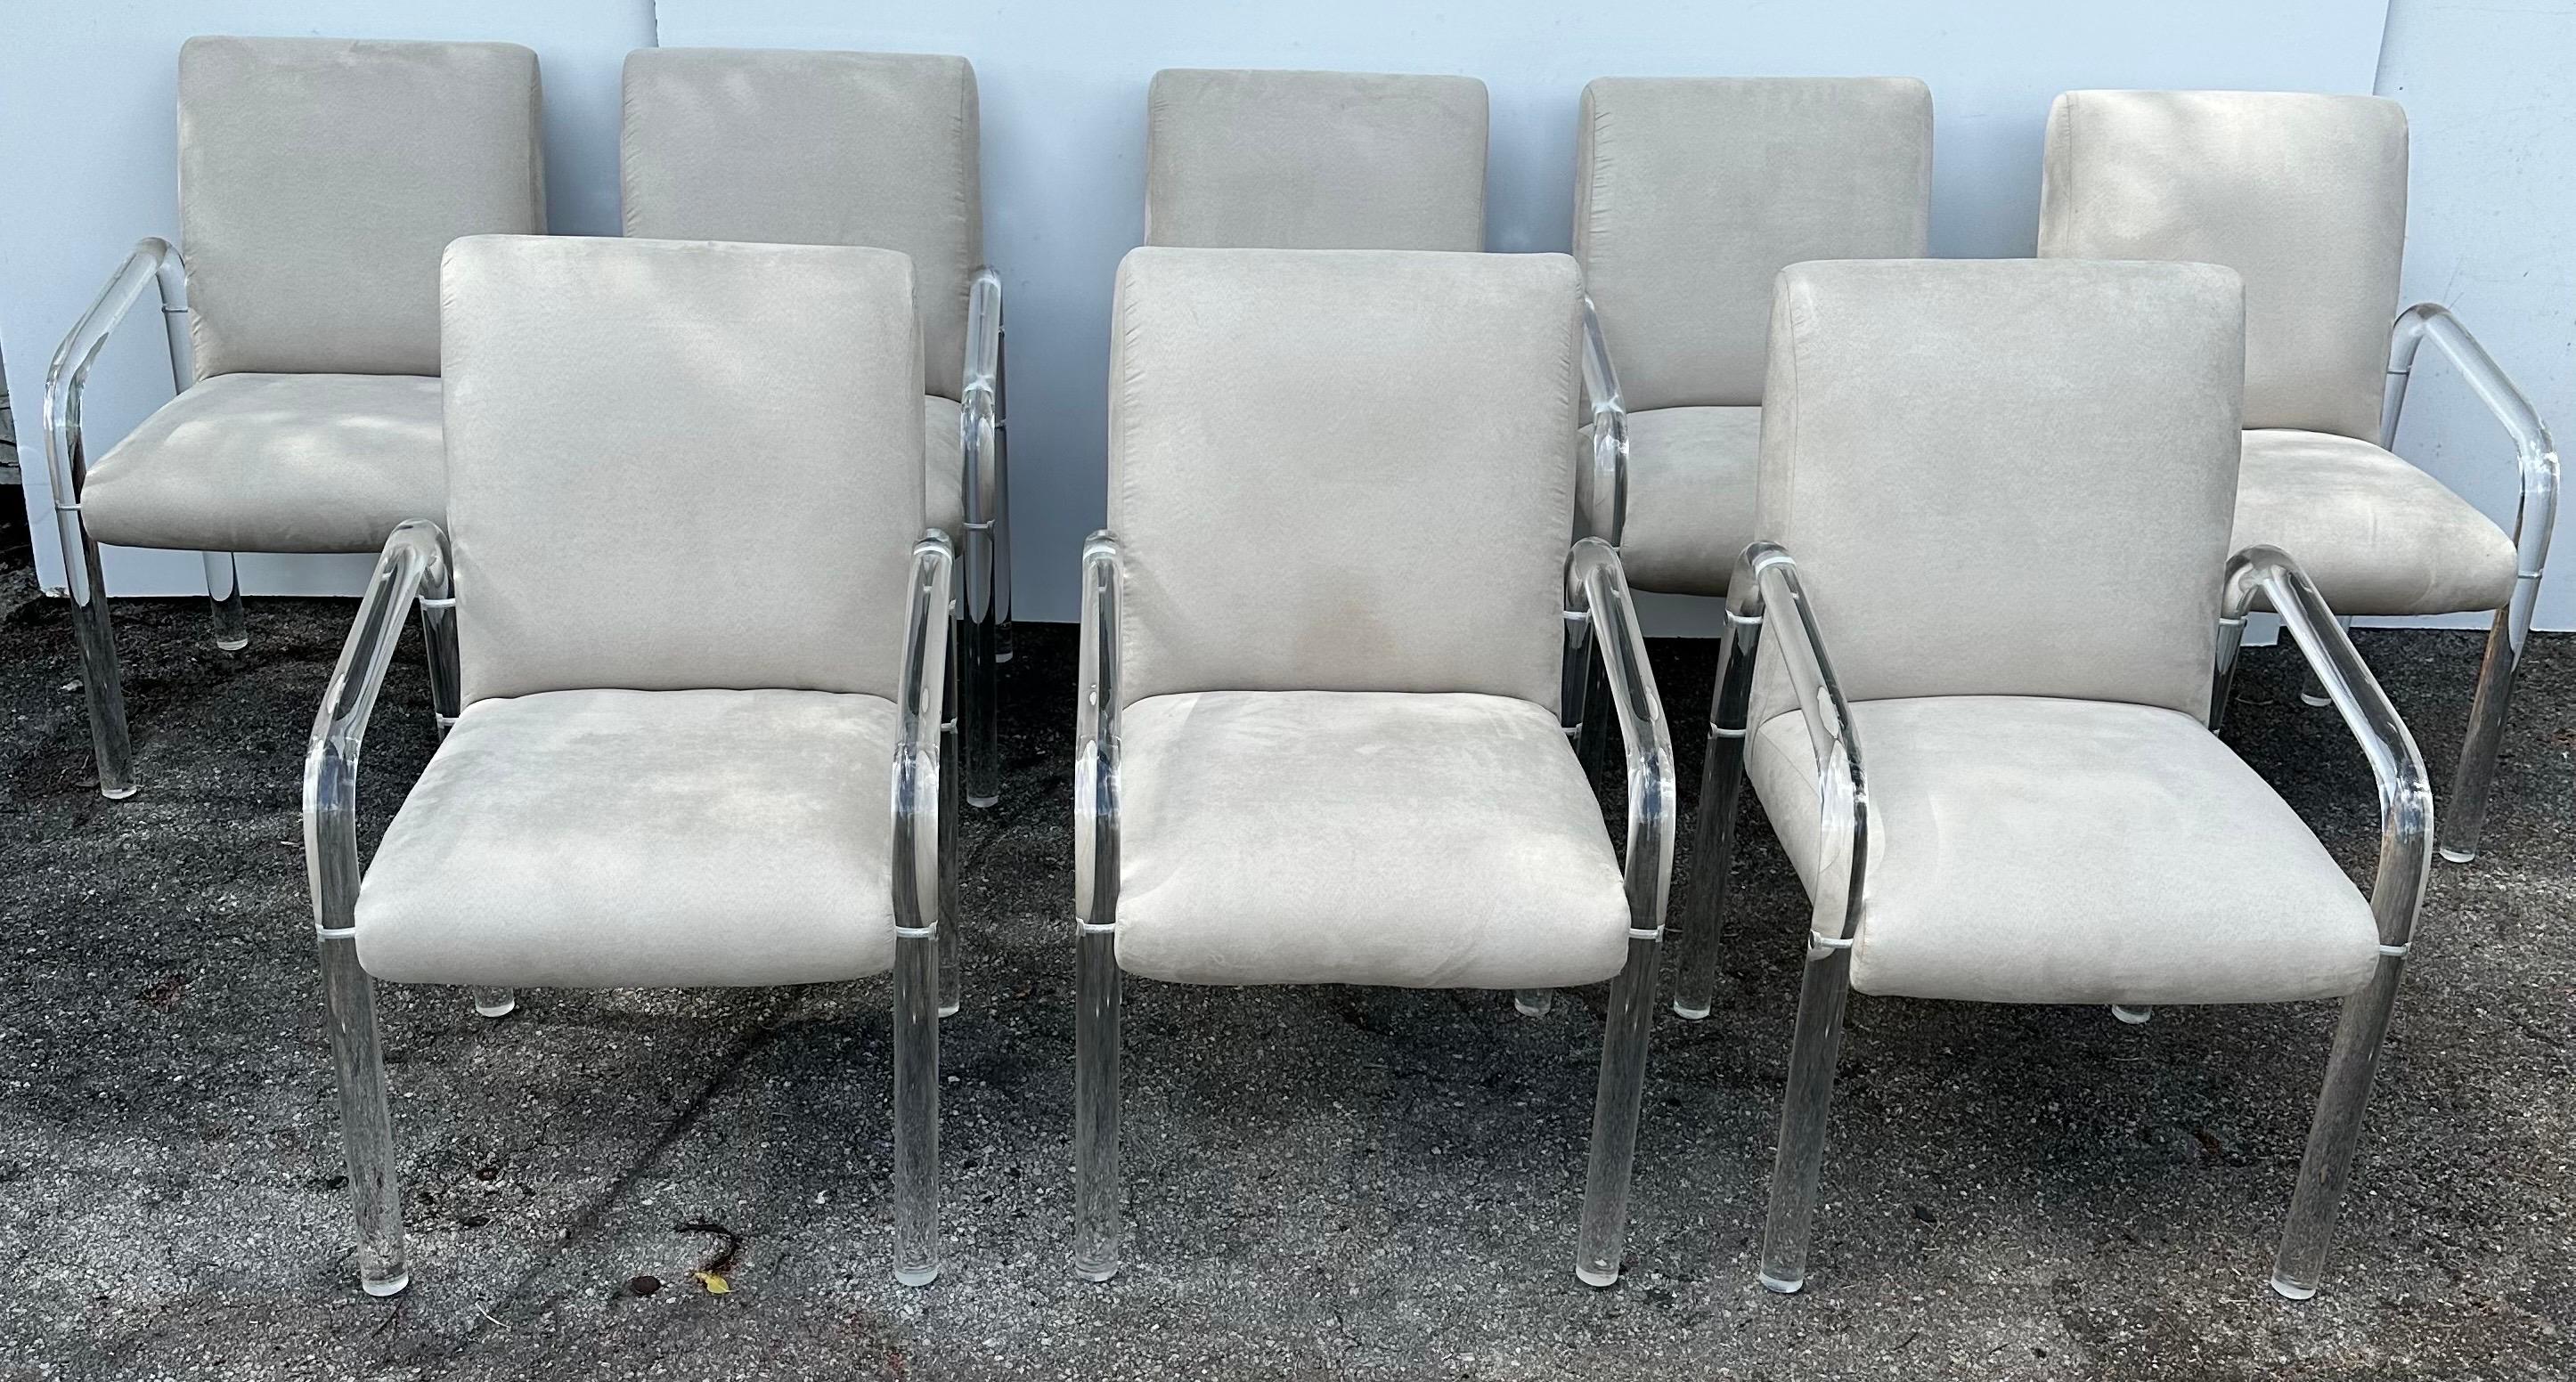 Set of 8 Lucite signed Lion in Frost Armchairs.
Newly reupholstered in beige ultra suede.